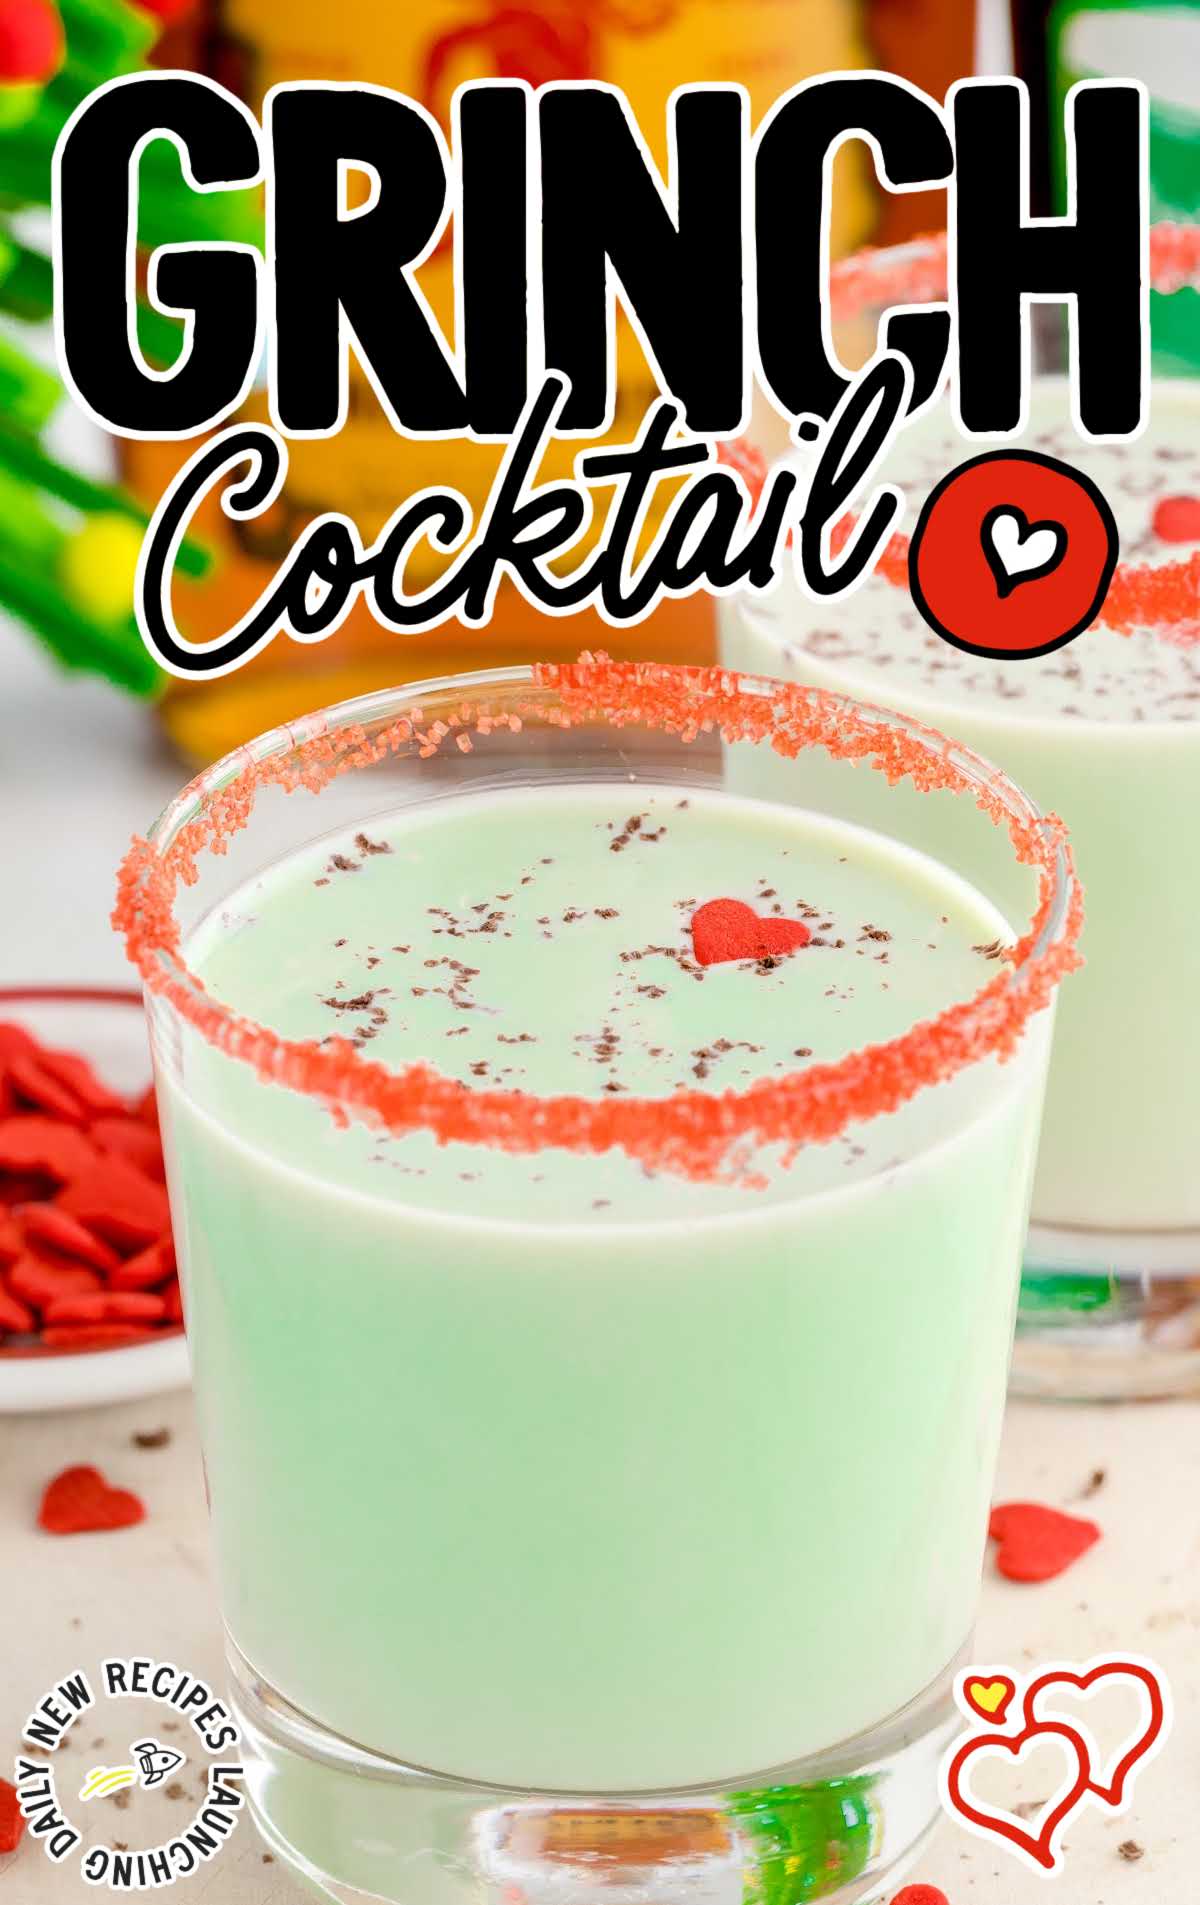 close up shot of a cocktail glass of Grinch Cocktail garnished with chocolate shaving and candy sprinkles